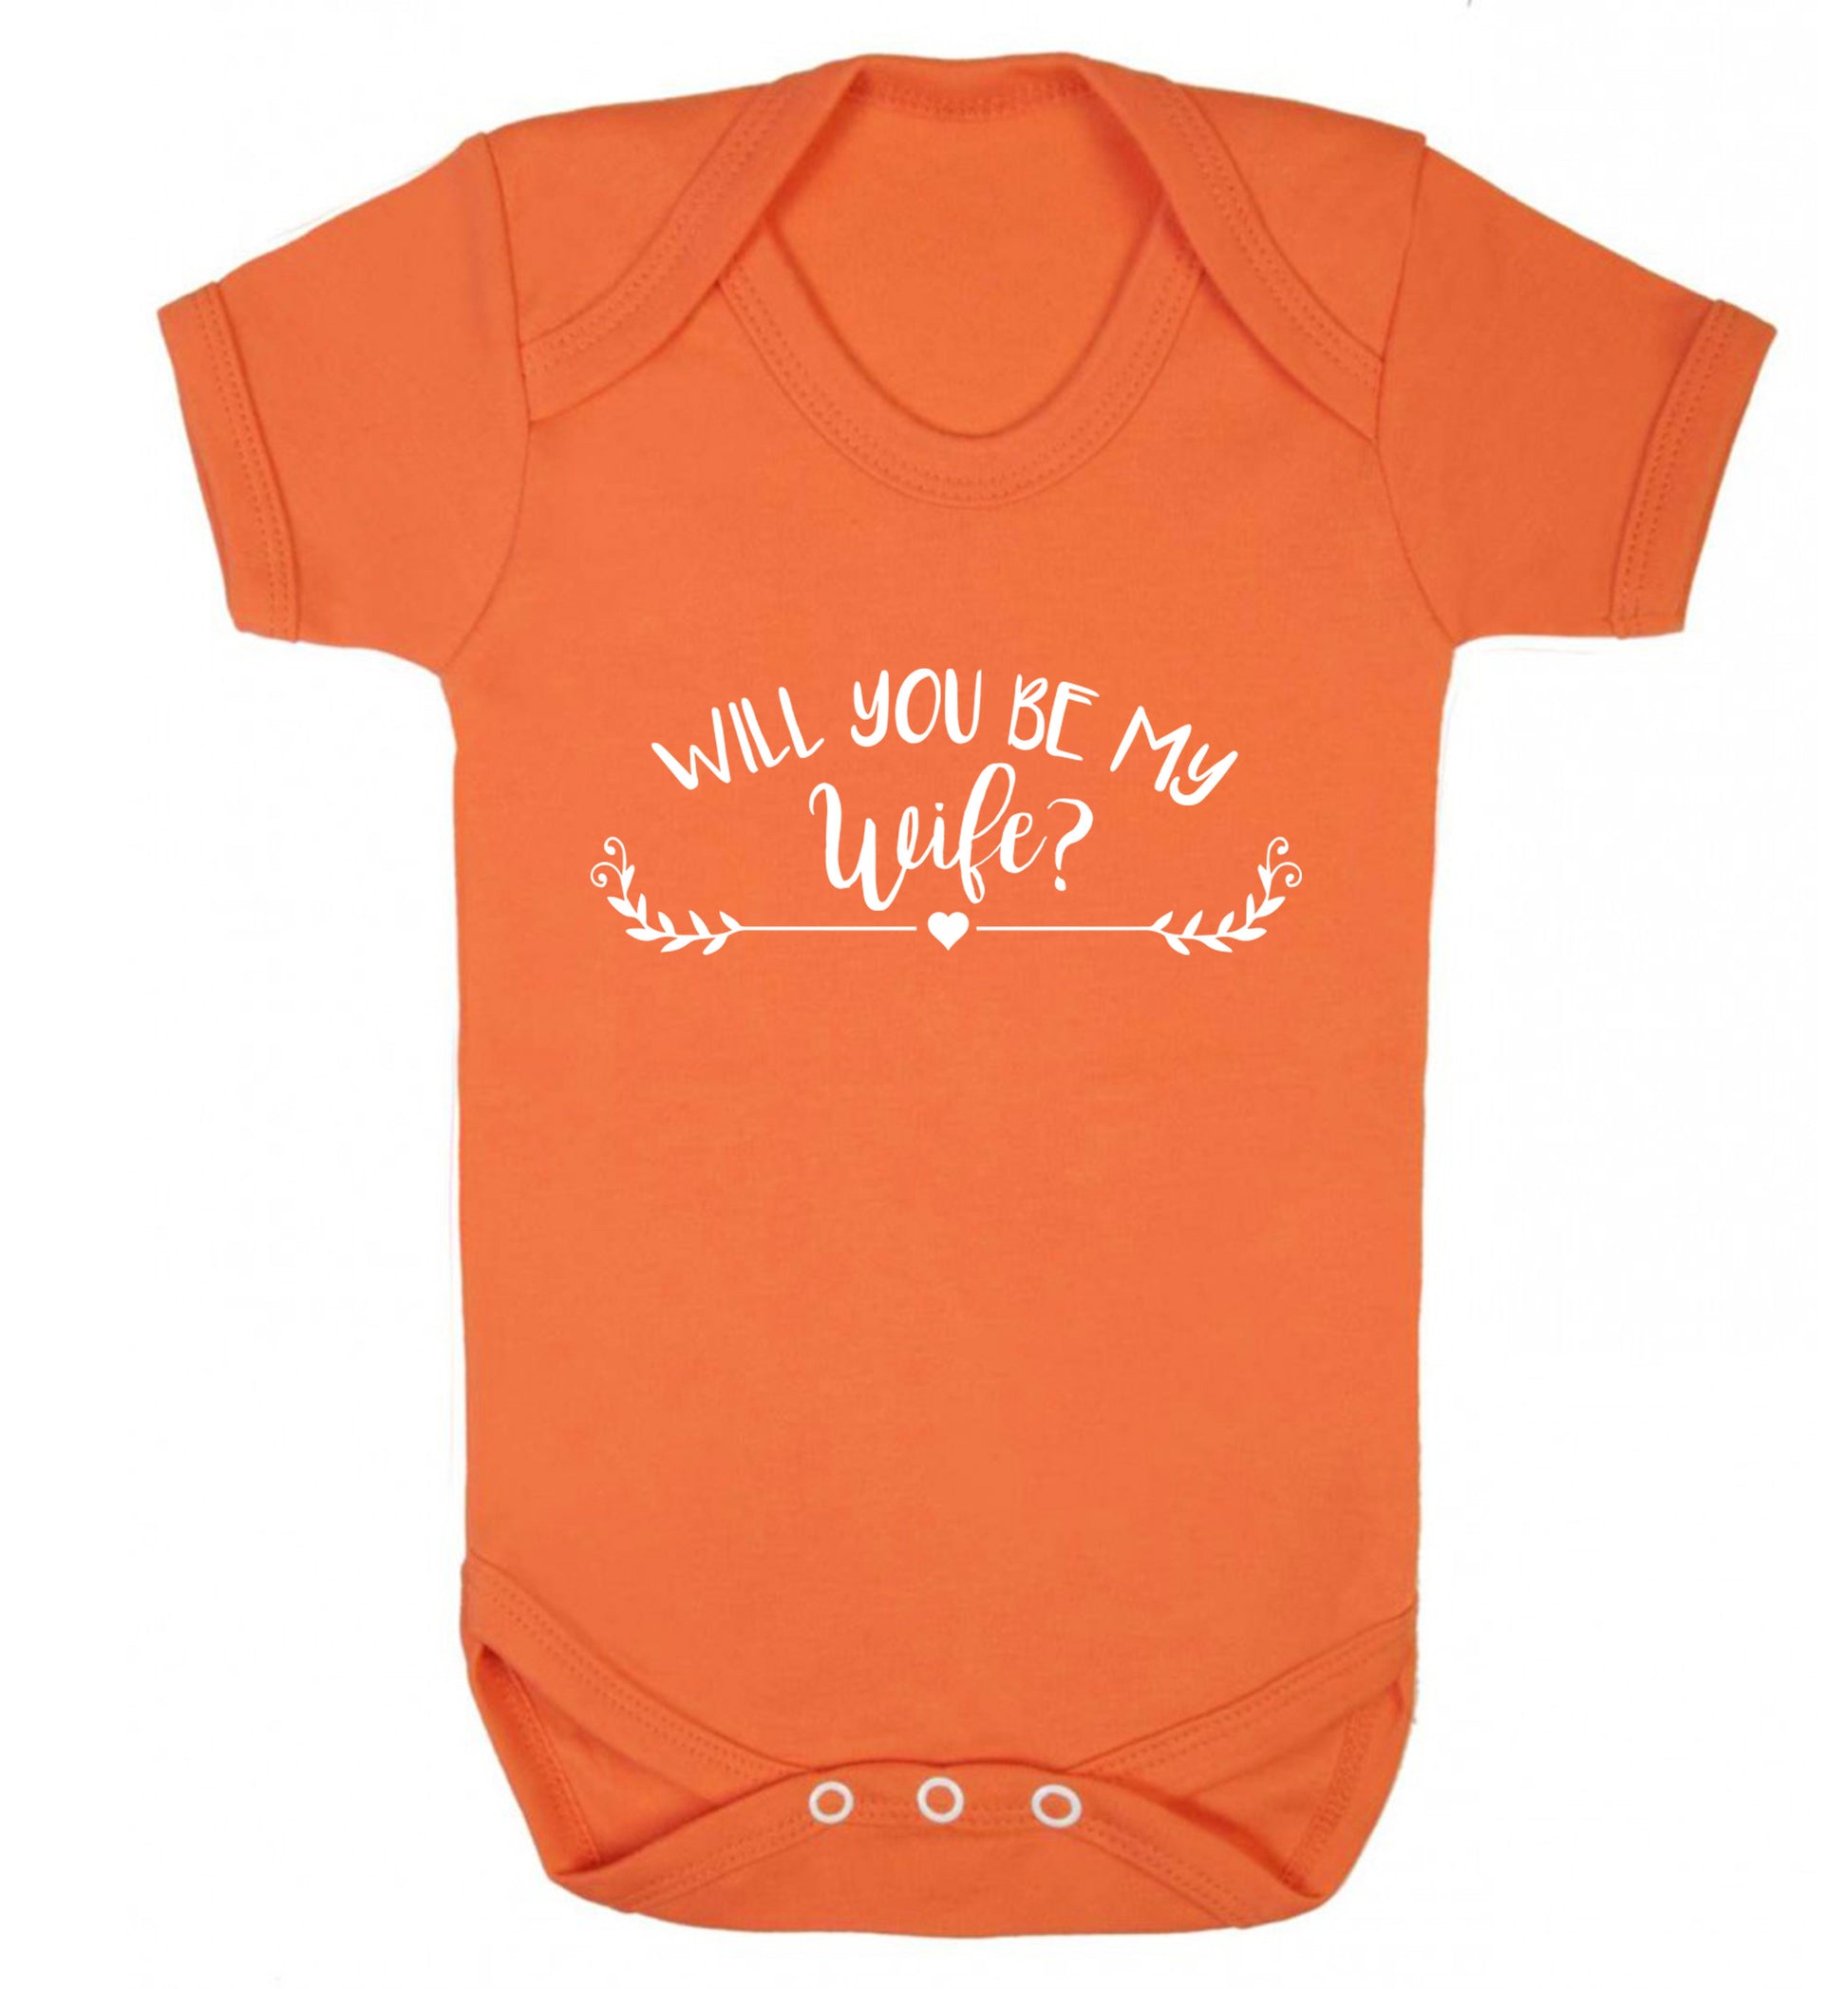 Will you be my wife? Baby Vest orange 18-24 months